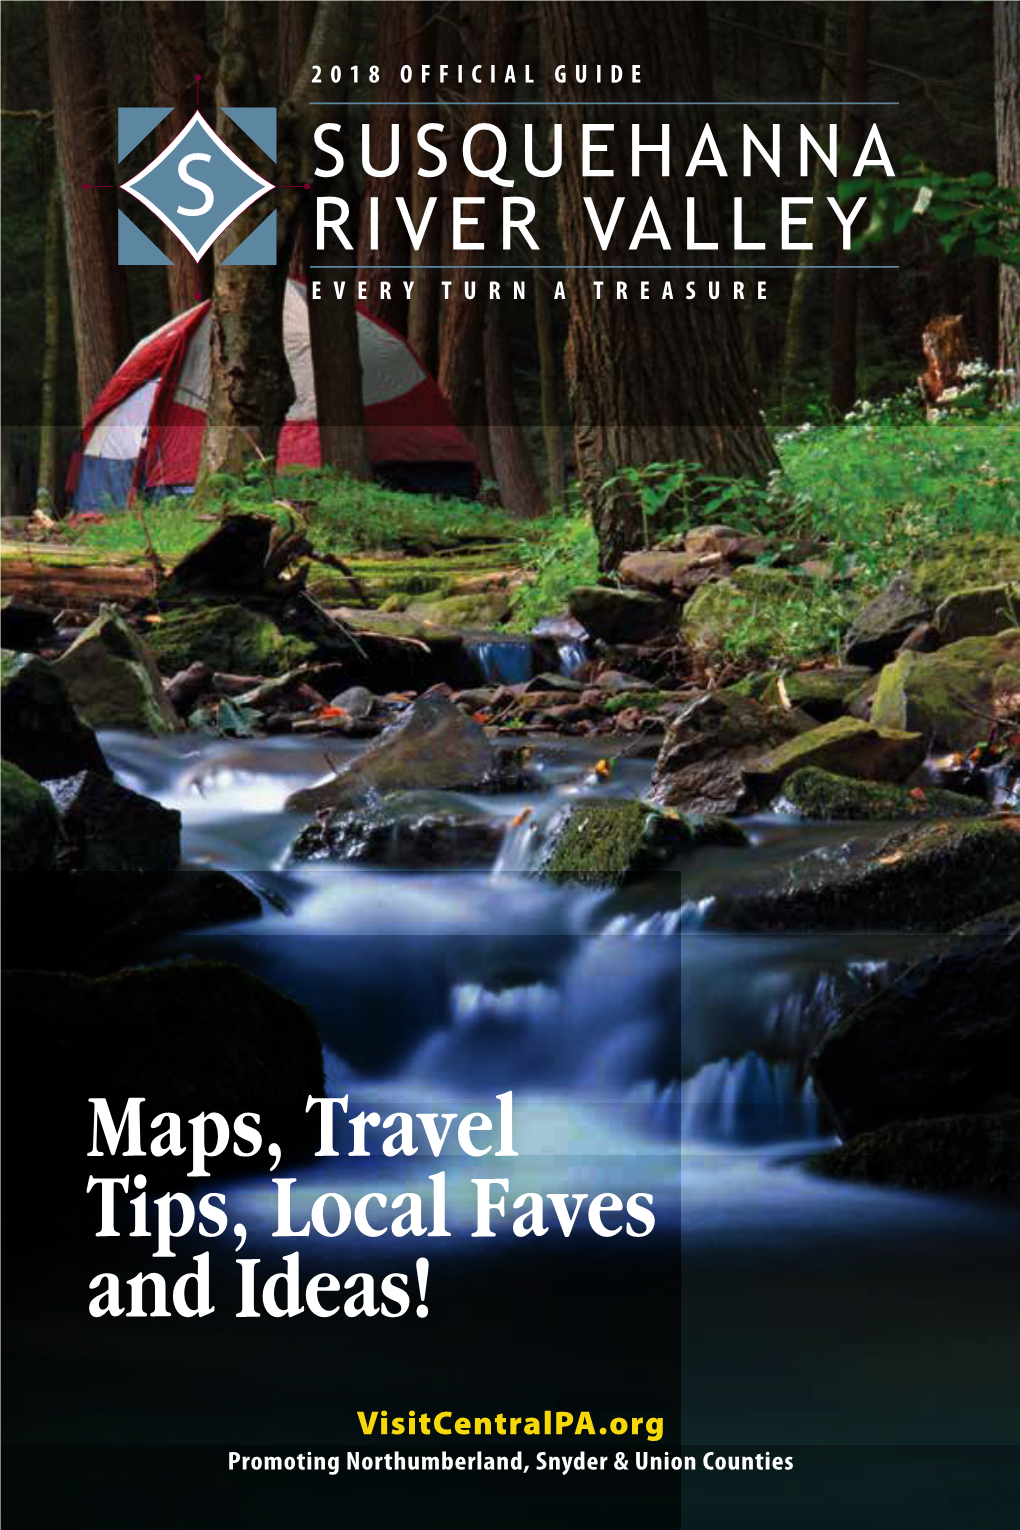 Maps, Travel Tips, Local Faves and Ideas!